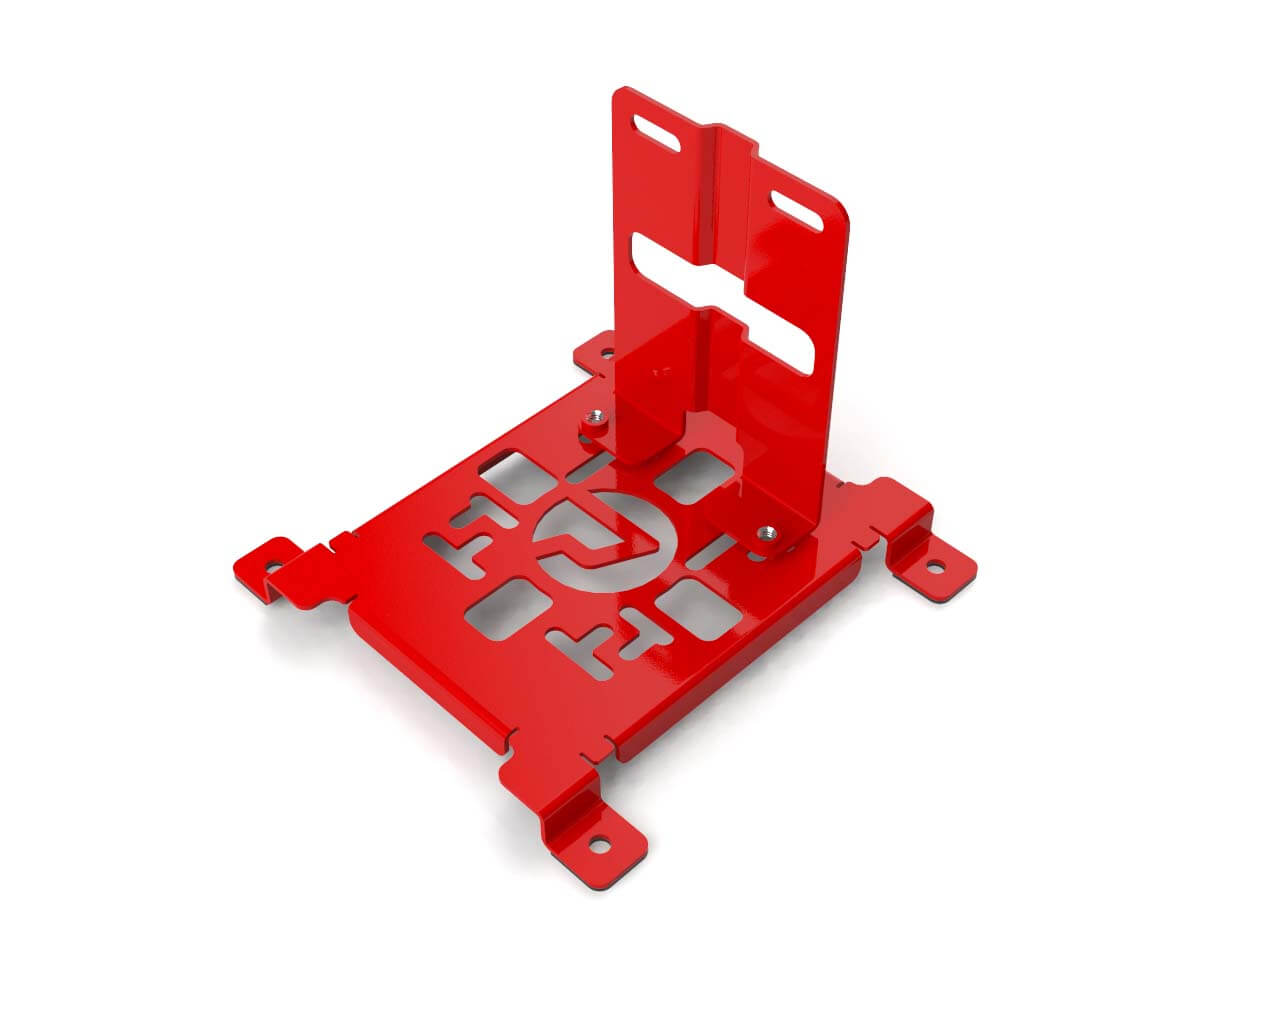 PrimoChill SX CTR2 Spider Mount Bracket Kit - 120mm Series - PrimoChill - KEEPING IT COOL UV Red